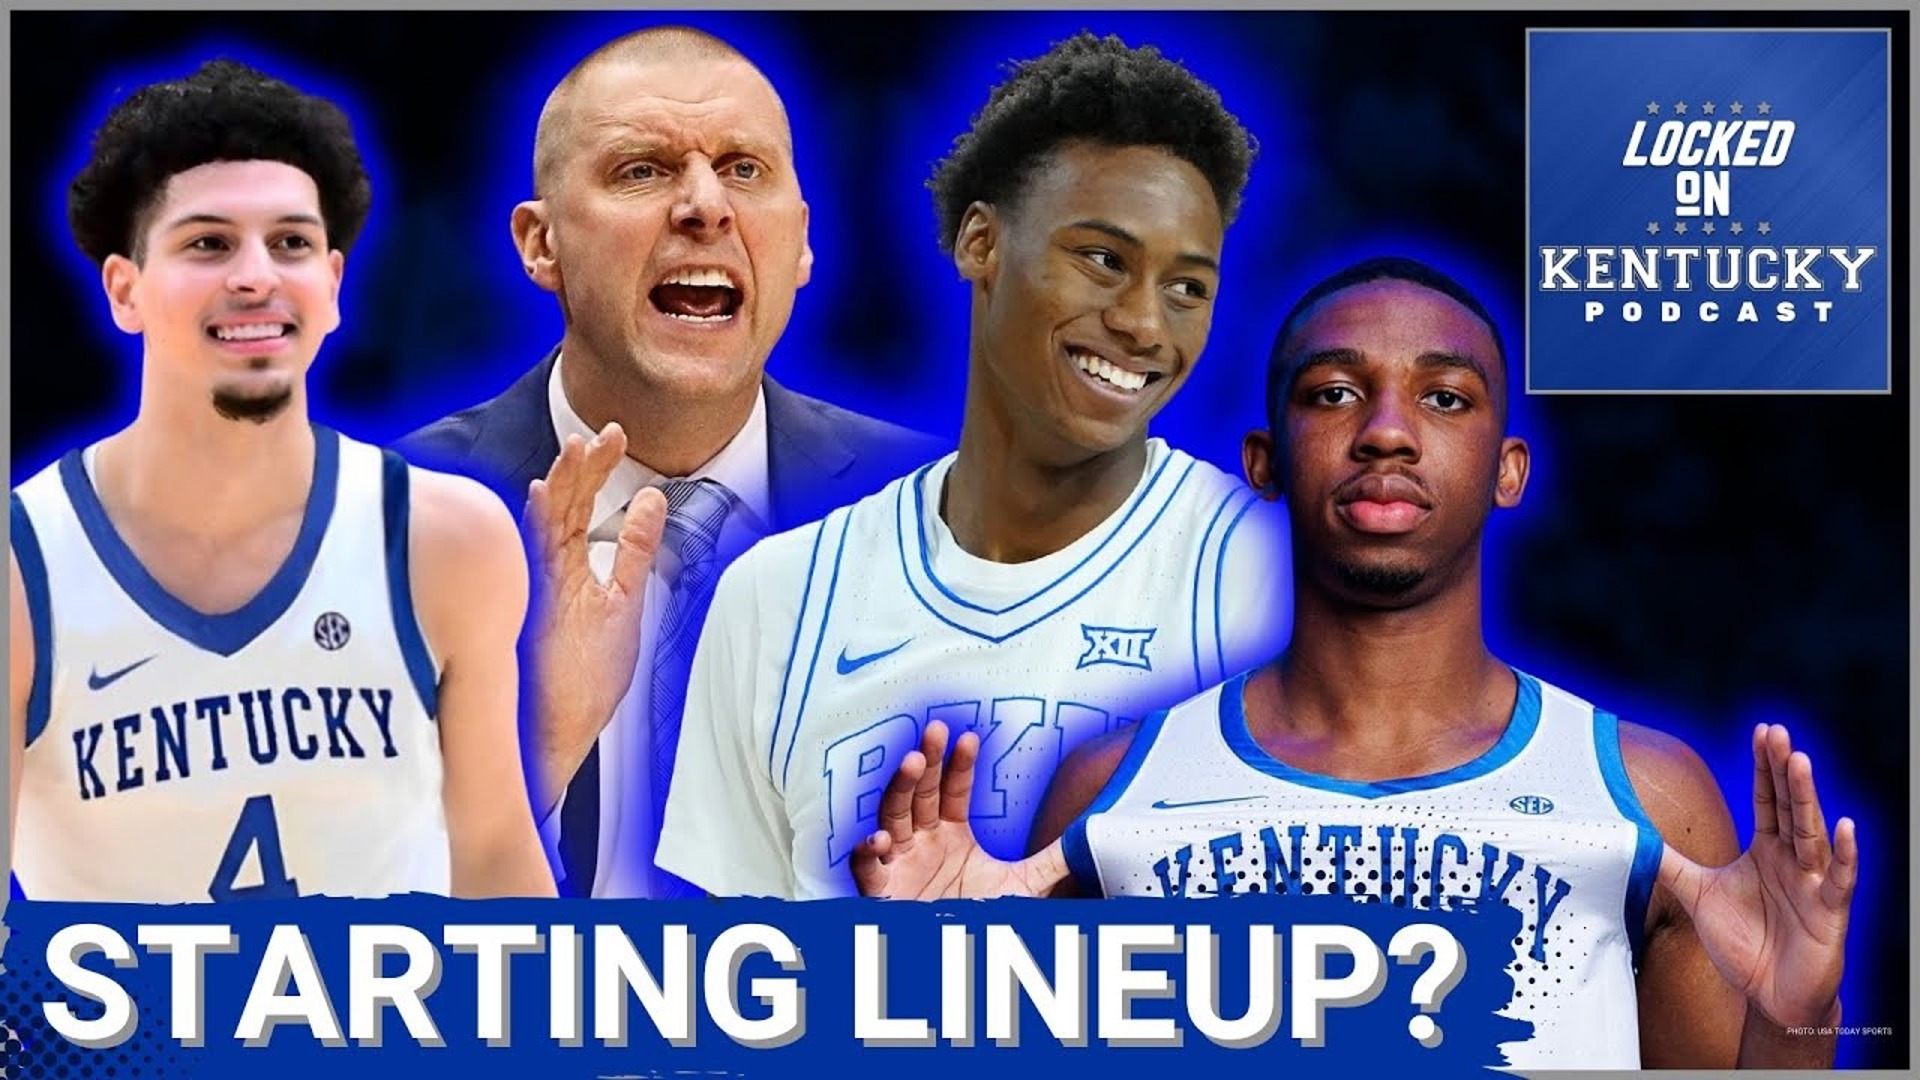 What will Kentucky basketball's starting lineup be underneath Mark Pope? Will it be Lamont Butler, Koby Brea, Jaxson Robinson, Andrew Carr and Amari Williams?